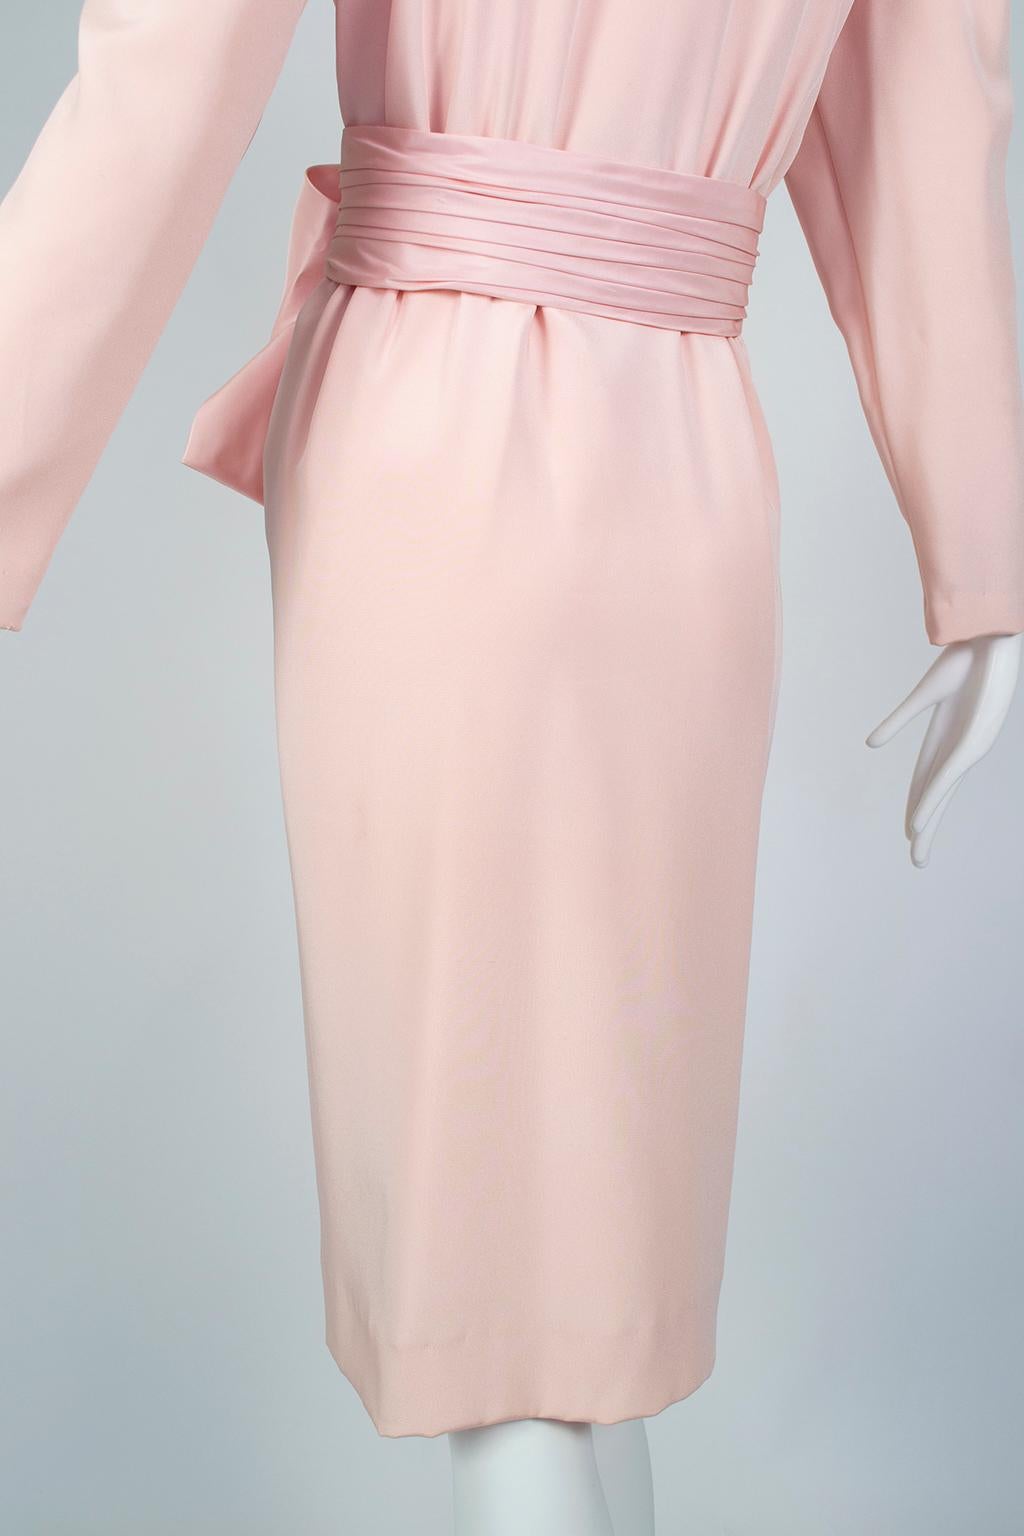 Akira Isogawa Pink Cocktail Dress with Oversize Jewel Cummerbund Bow – M, 1980s In Good Condition For Sale In Tucson, AZ